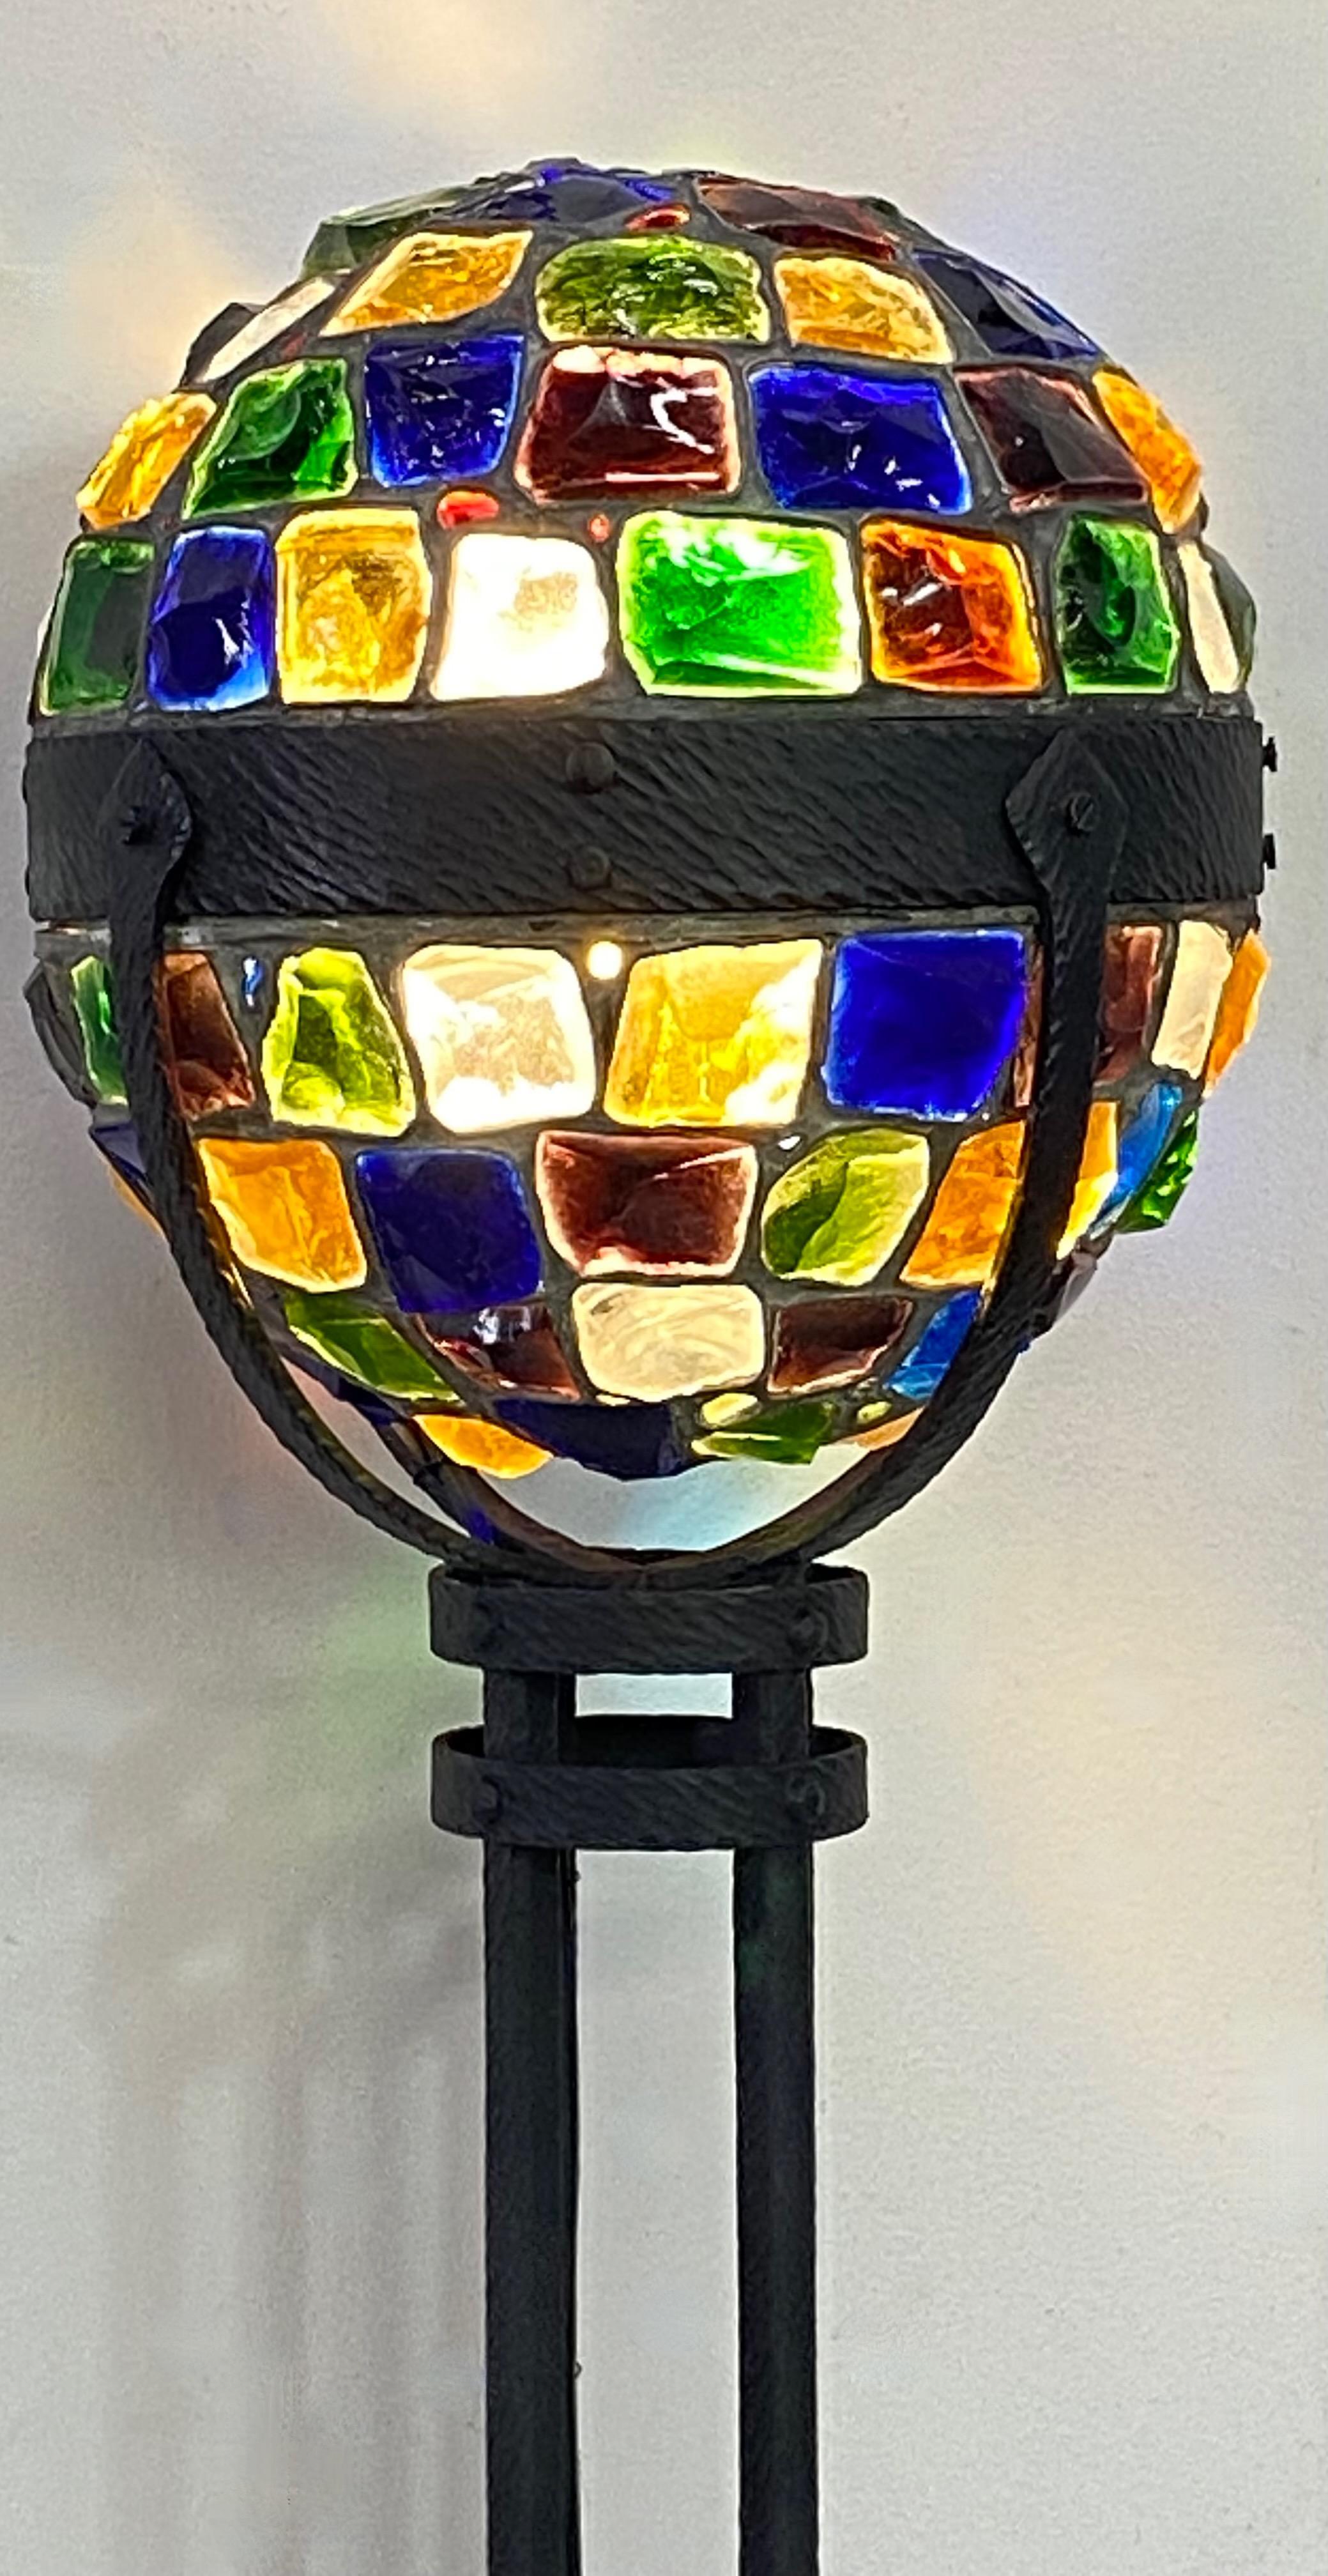 20th Century Secessionist Style Wrought Iron and Glass Chunk Jewel Newel Post Lamp, ca 1900